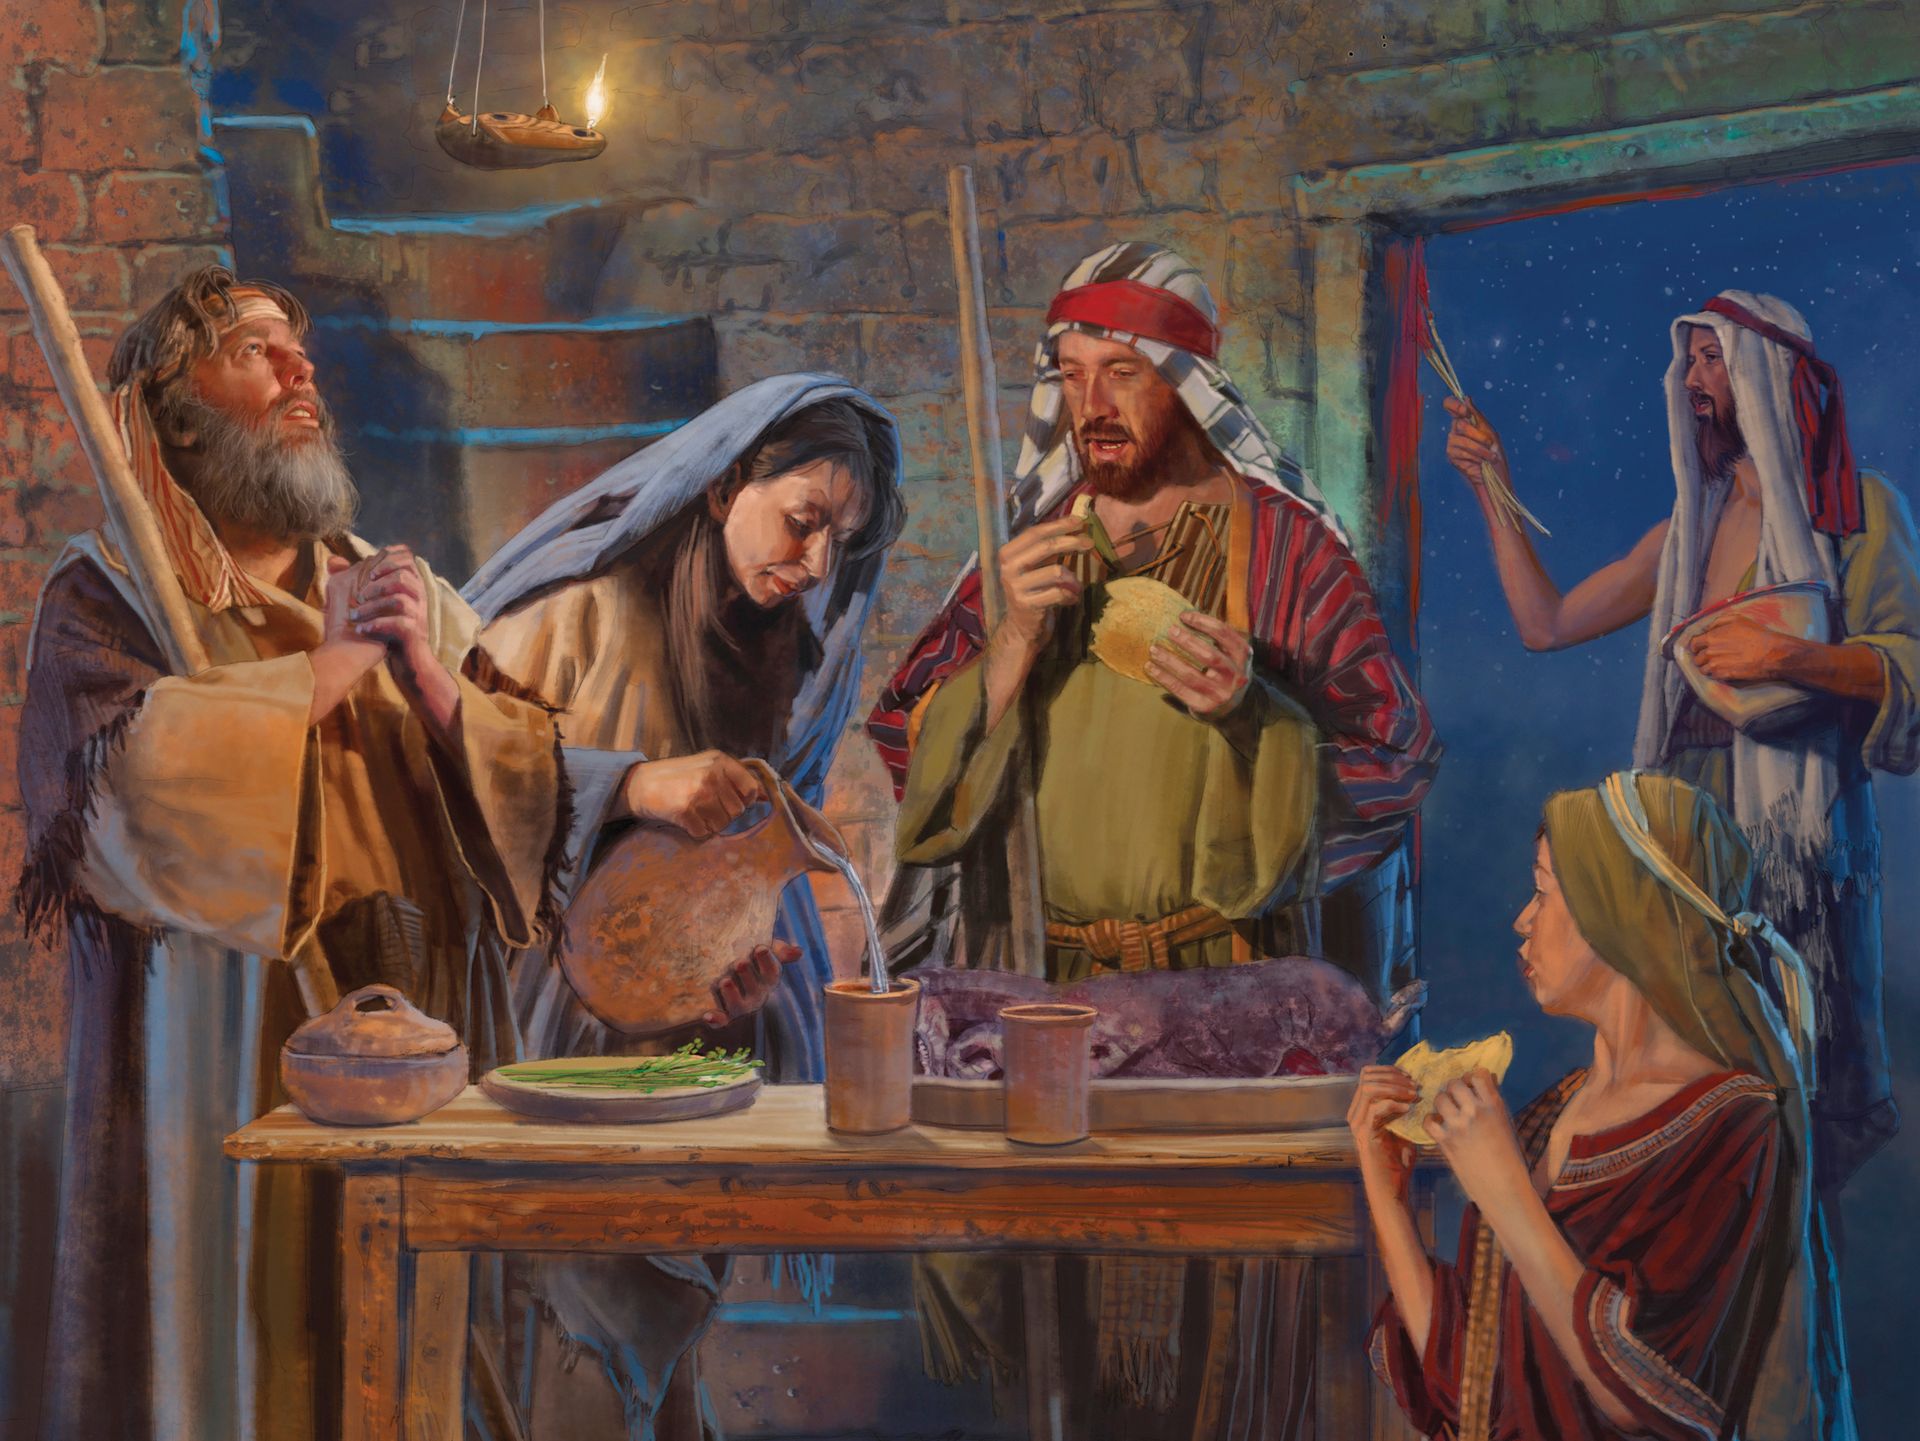 The Passover Supper, by Brian Call